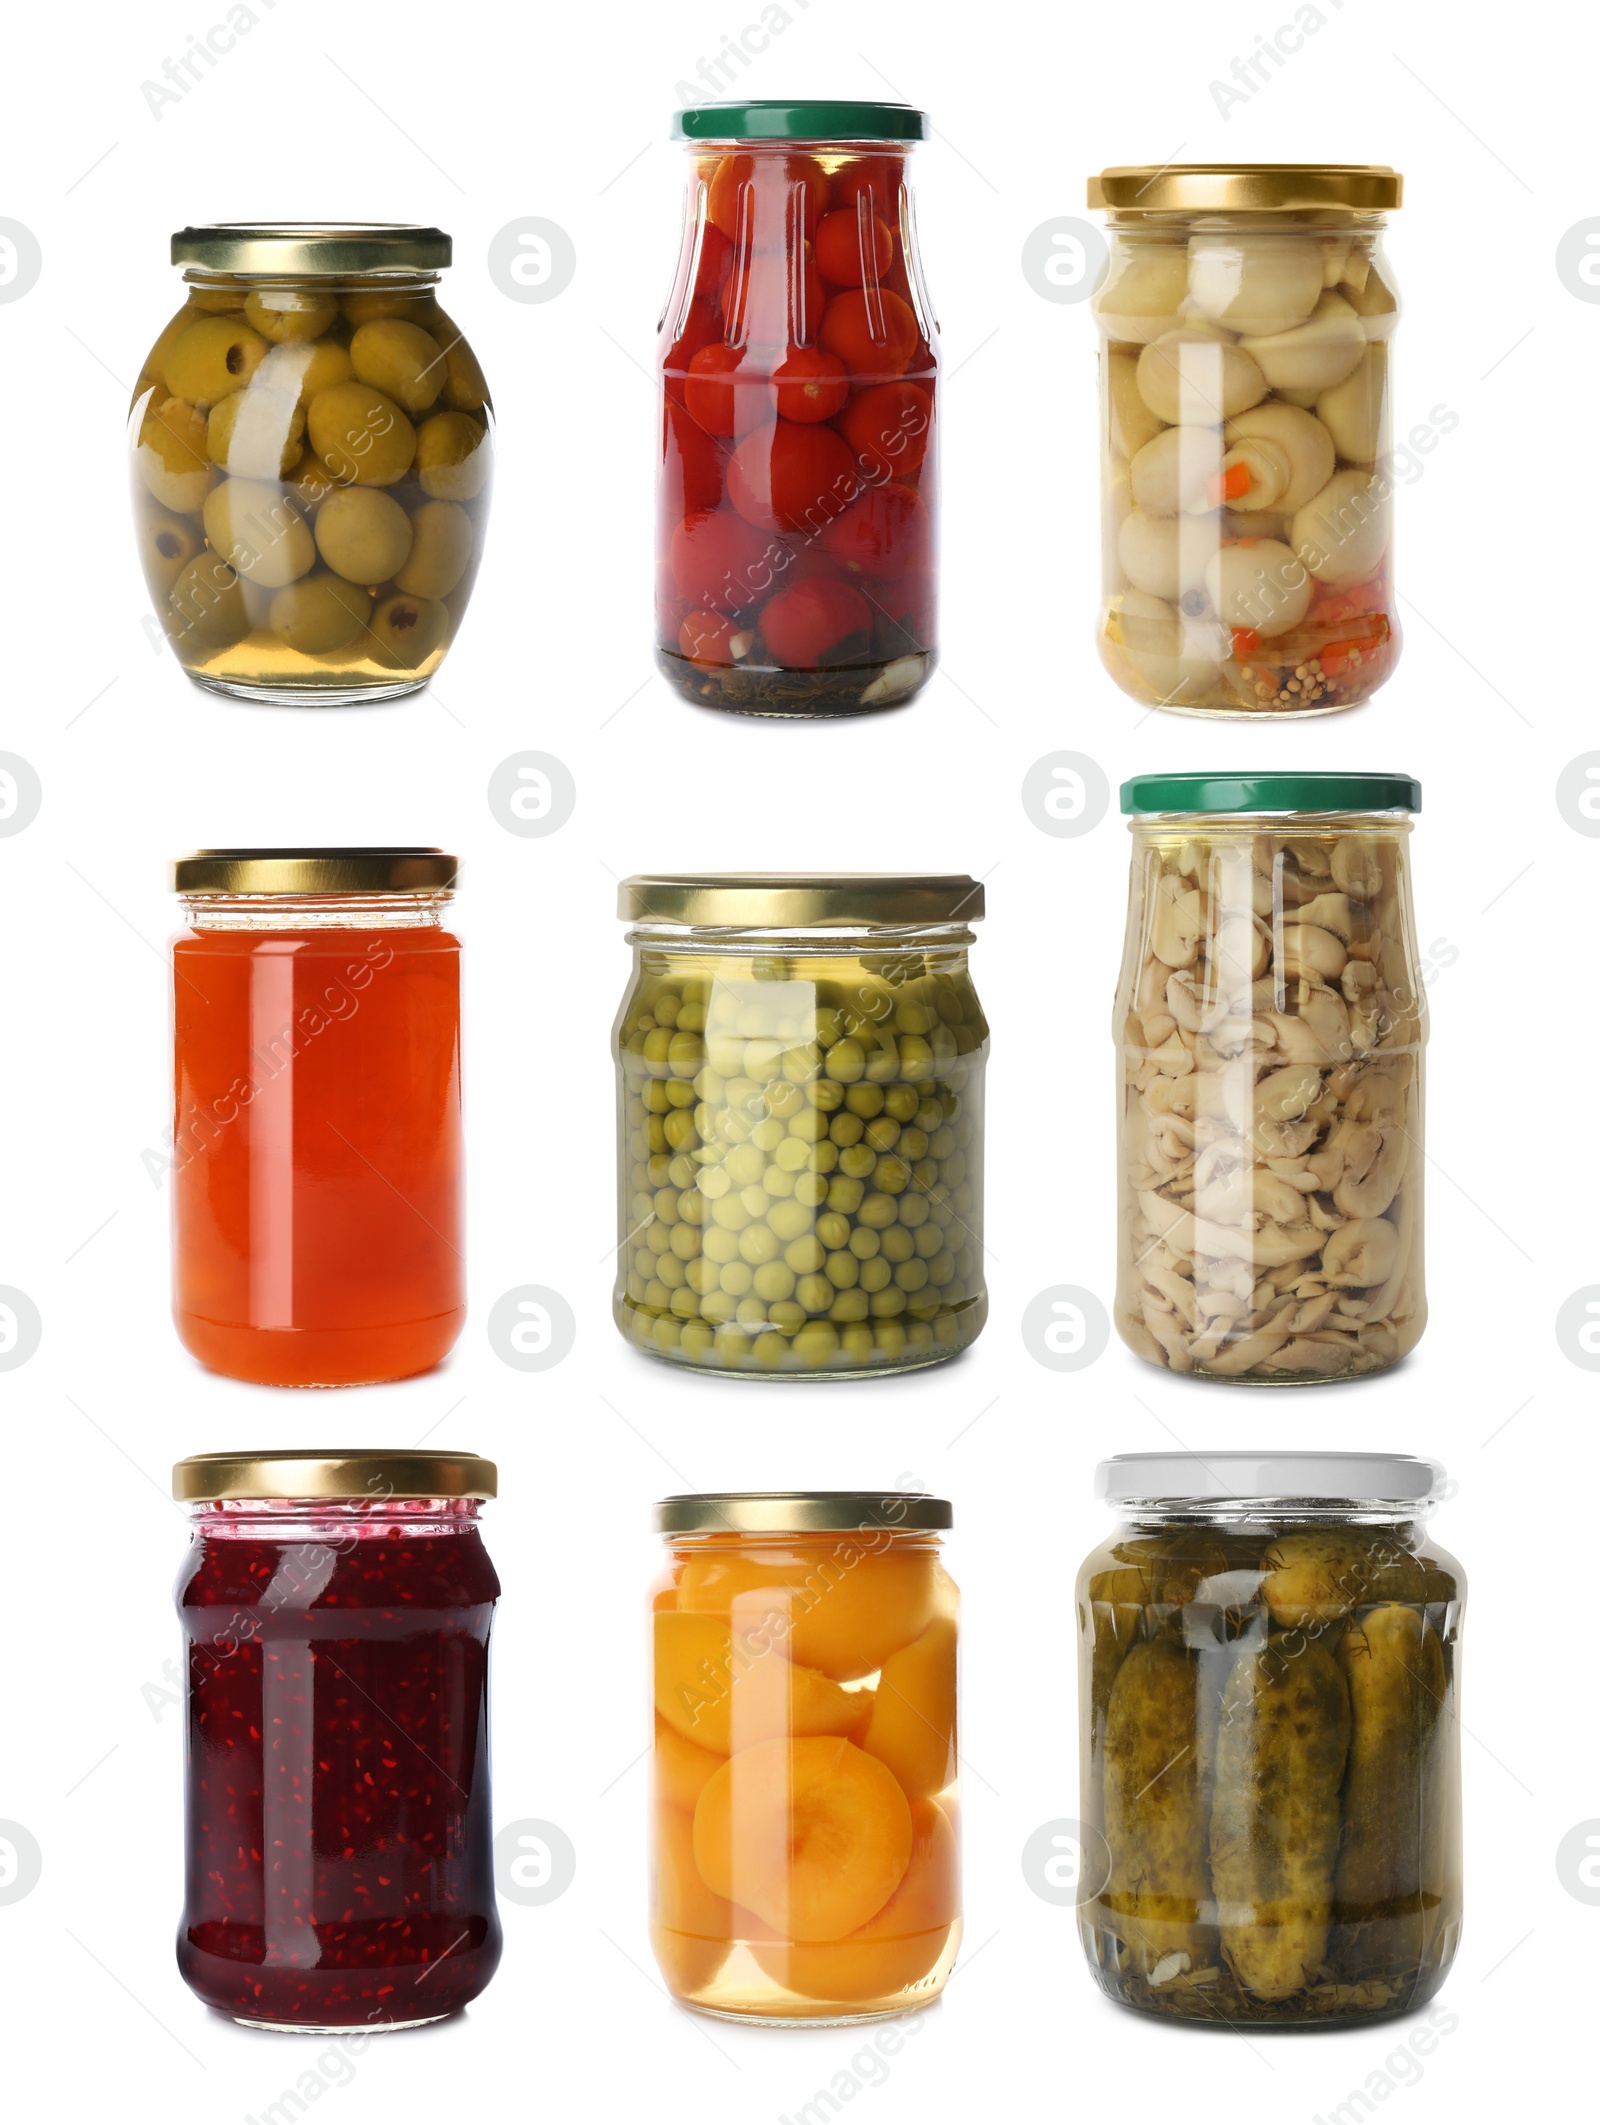 Image of Set of jars with jams and pickled foods on white background